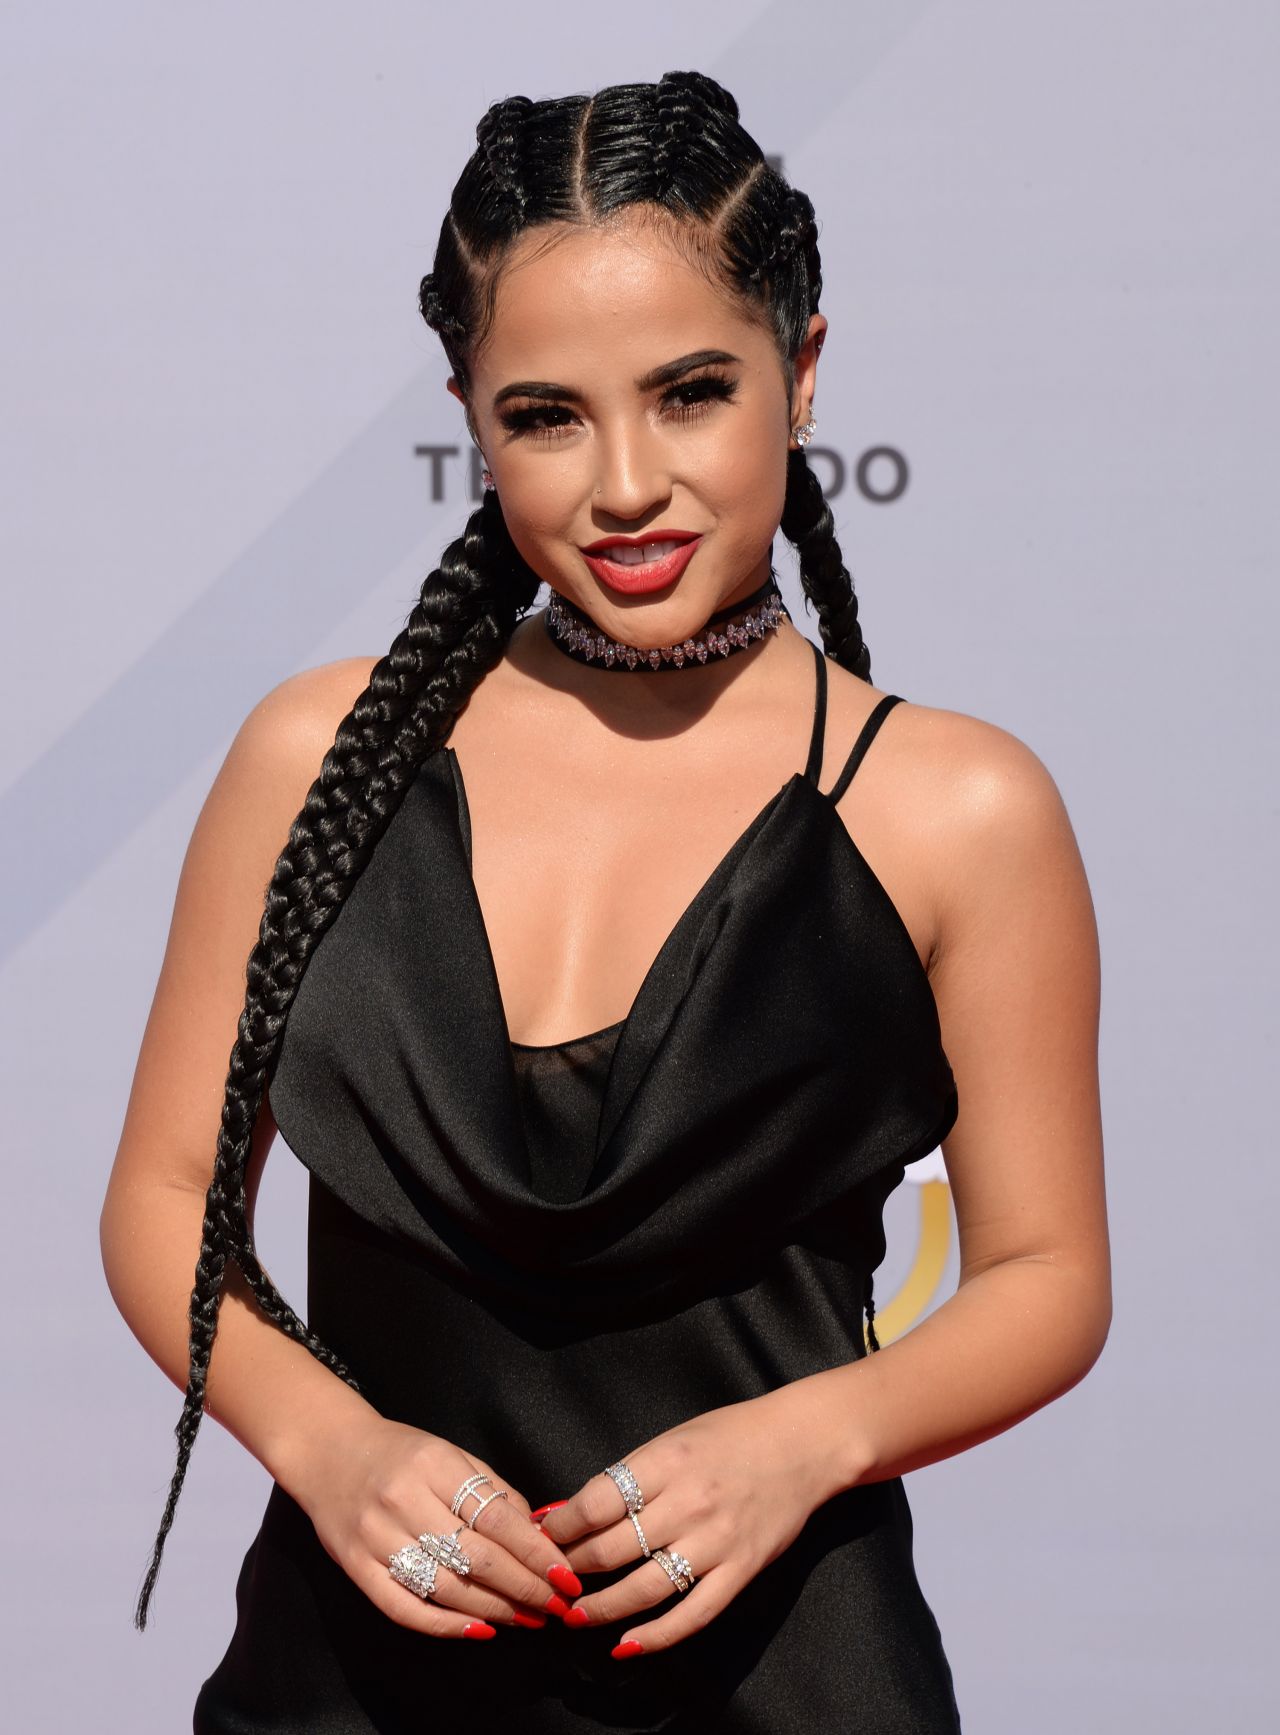 Becky G in Black Dress Wallpapers